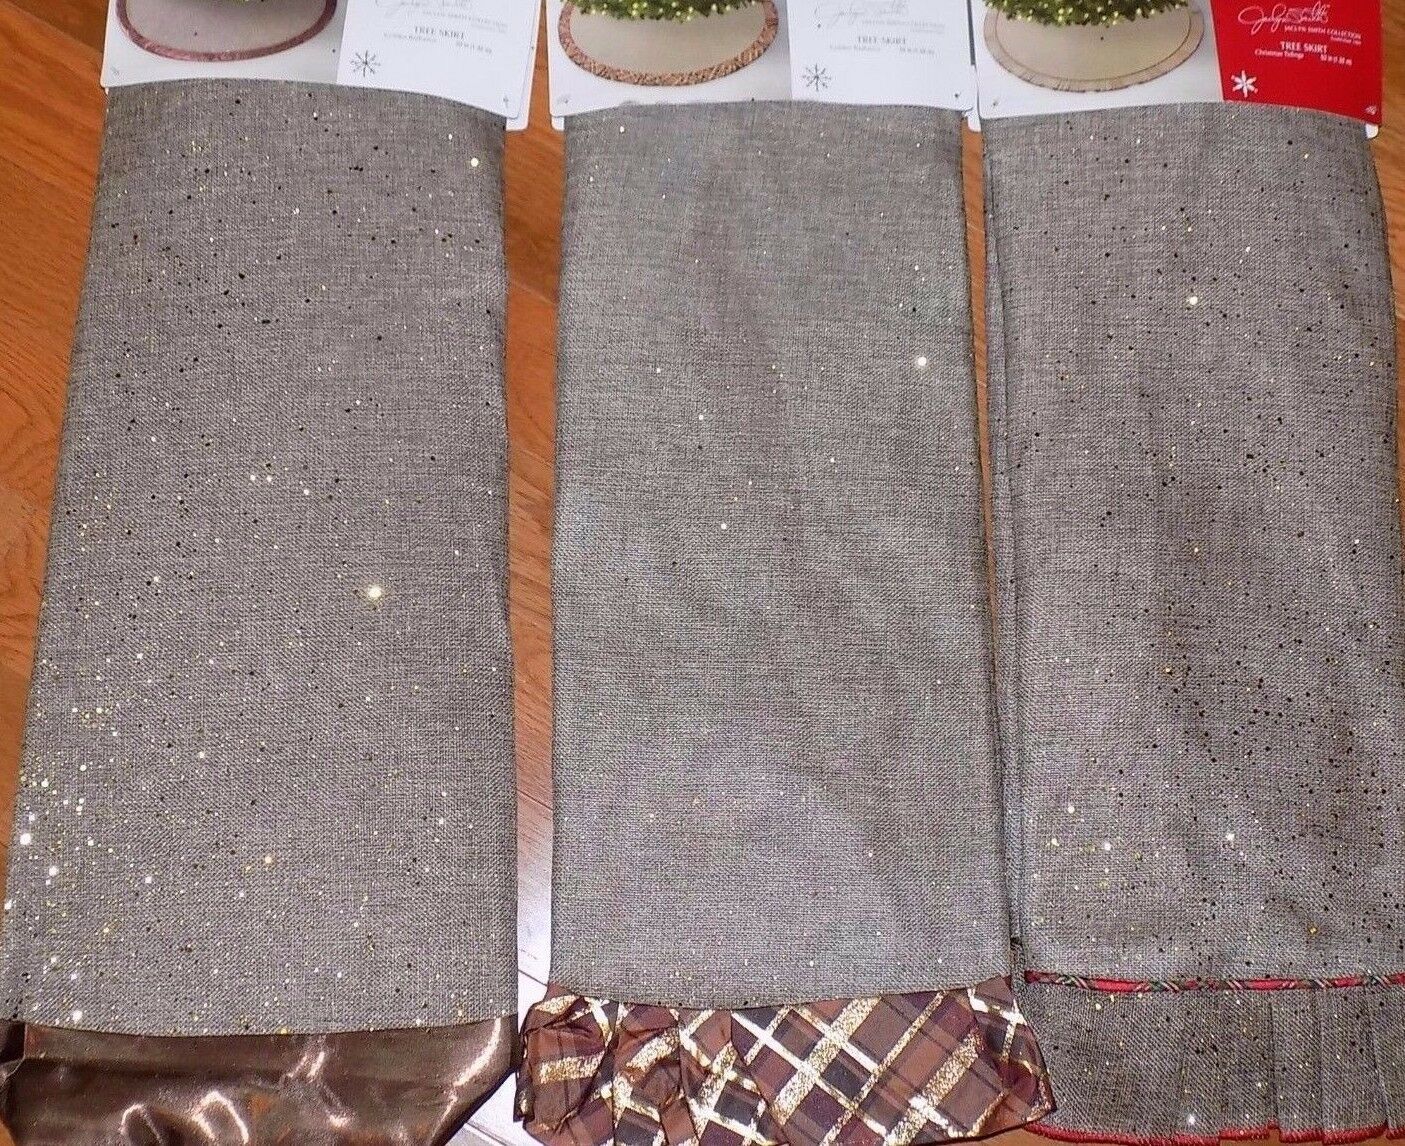 NEW 52" Brown Burlap Cabin Chic "Linen" Christmas Tree Skirt - FREE SHIPPING - $24.50